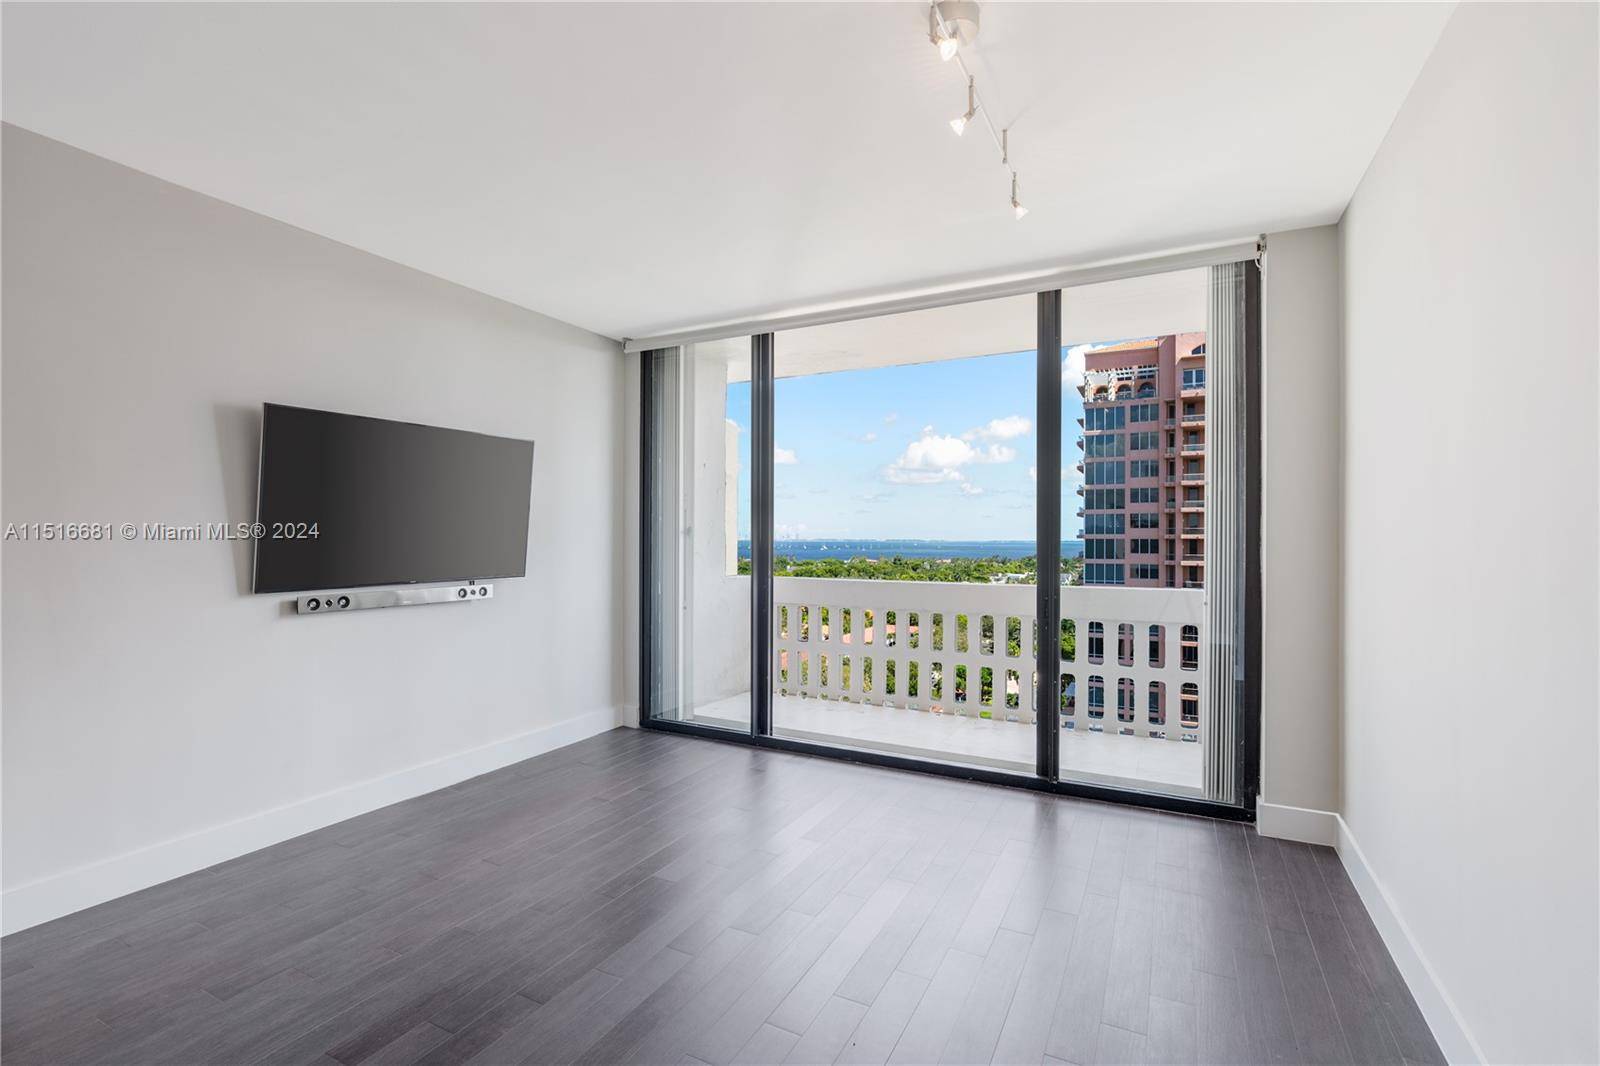 Beautifully renovated Penthouse with massive balcony and endless water views.